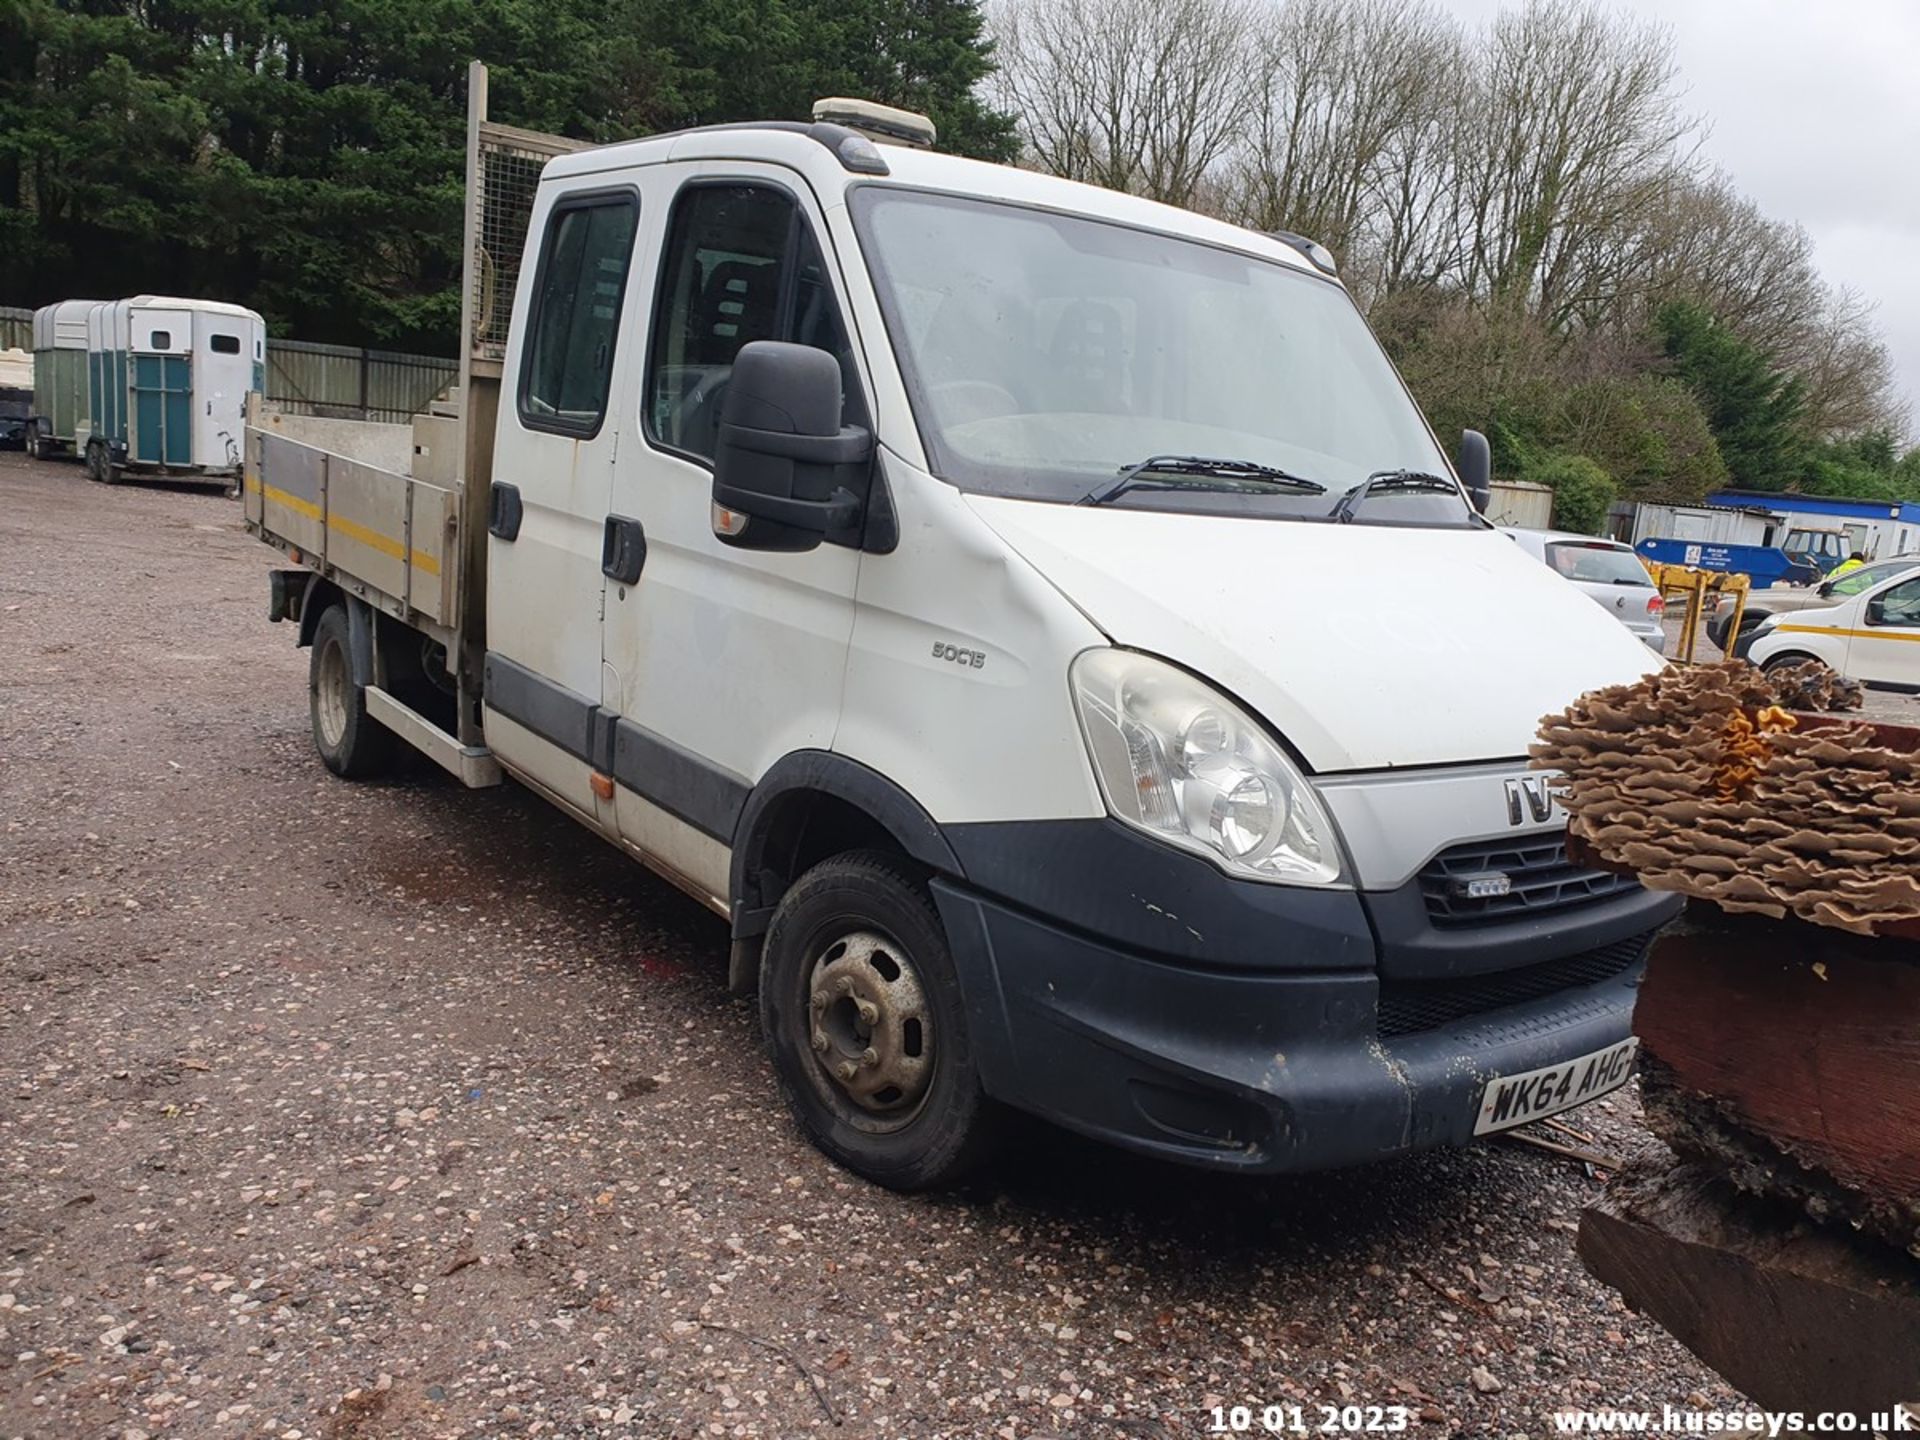 14/64 IVECO DAILY 50C15 - 2998cc 4dr Tipper (White, 108k) - Image 3 of 26